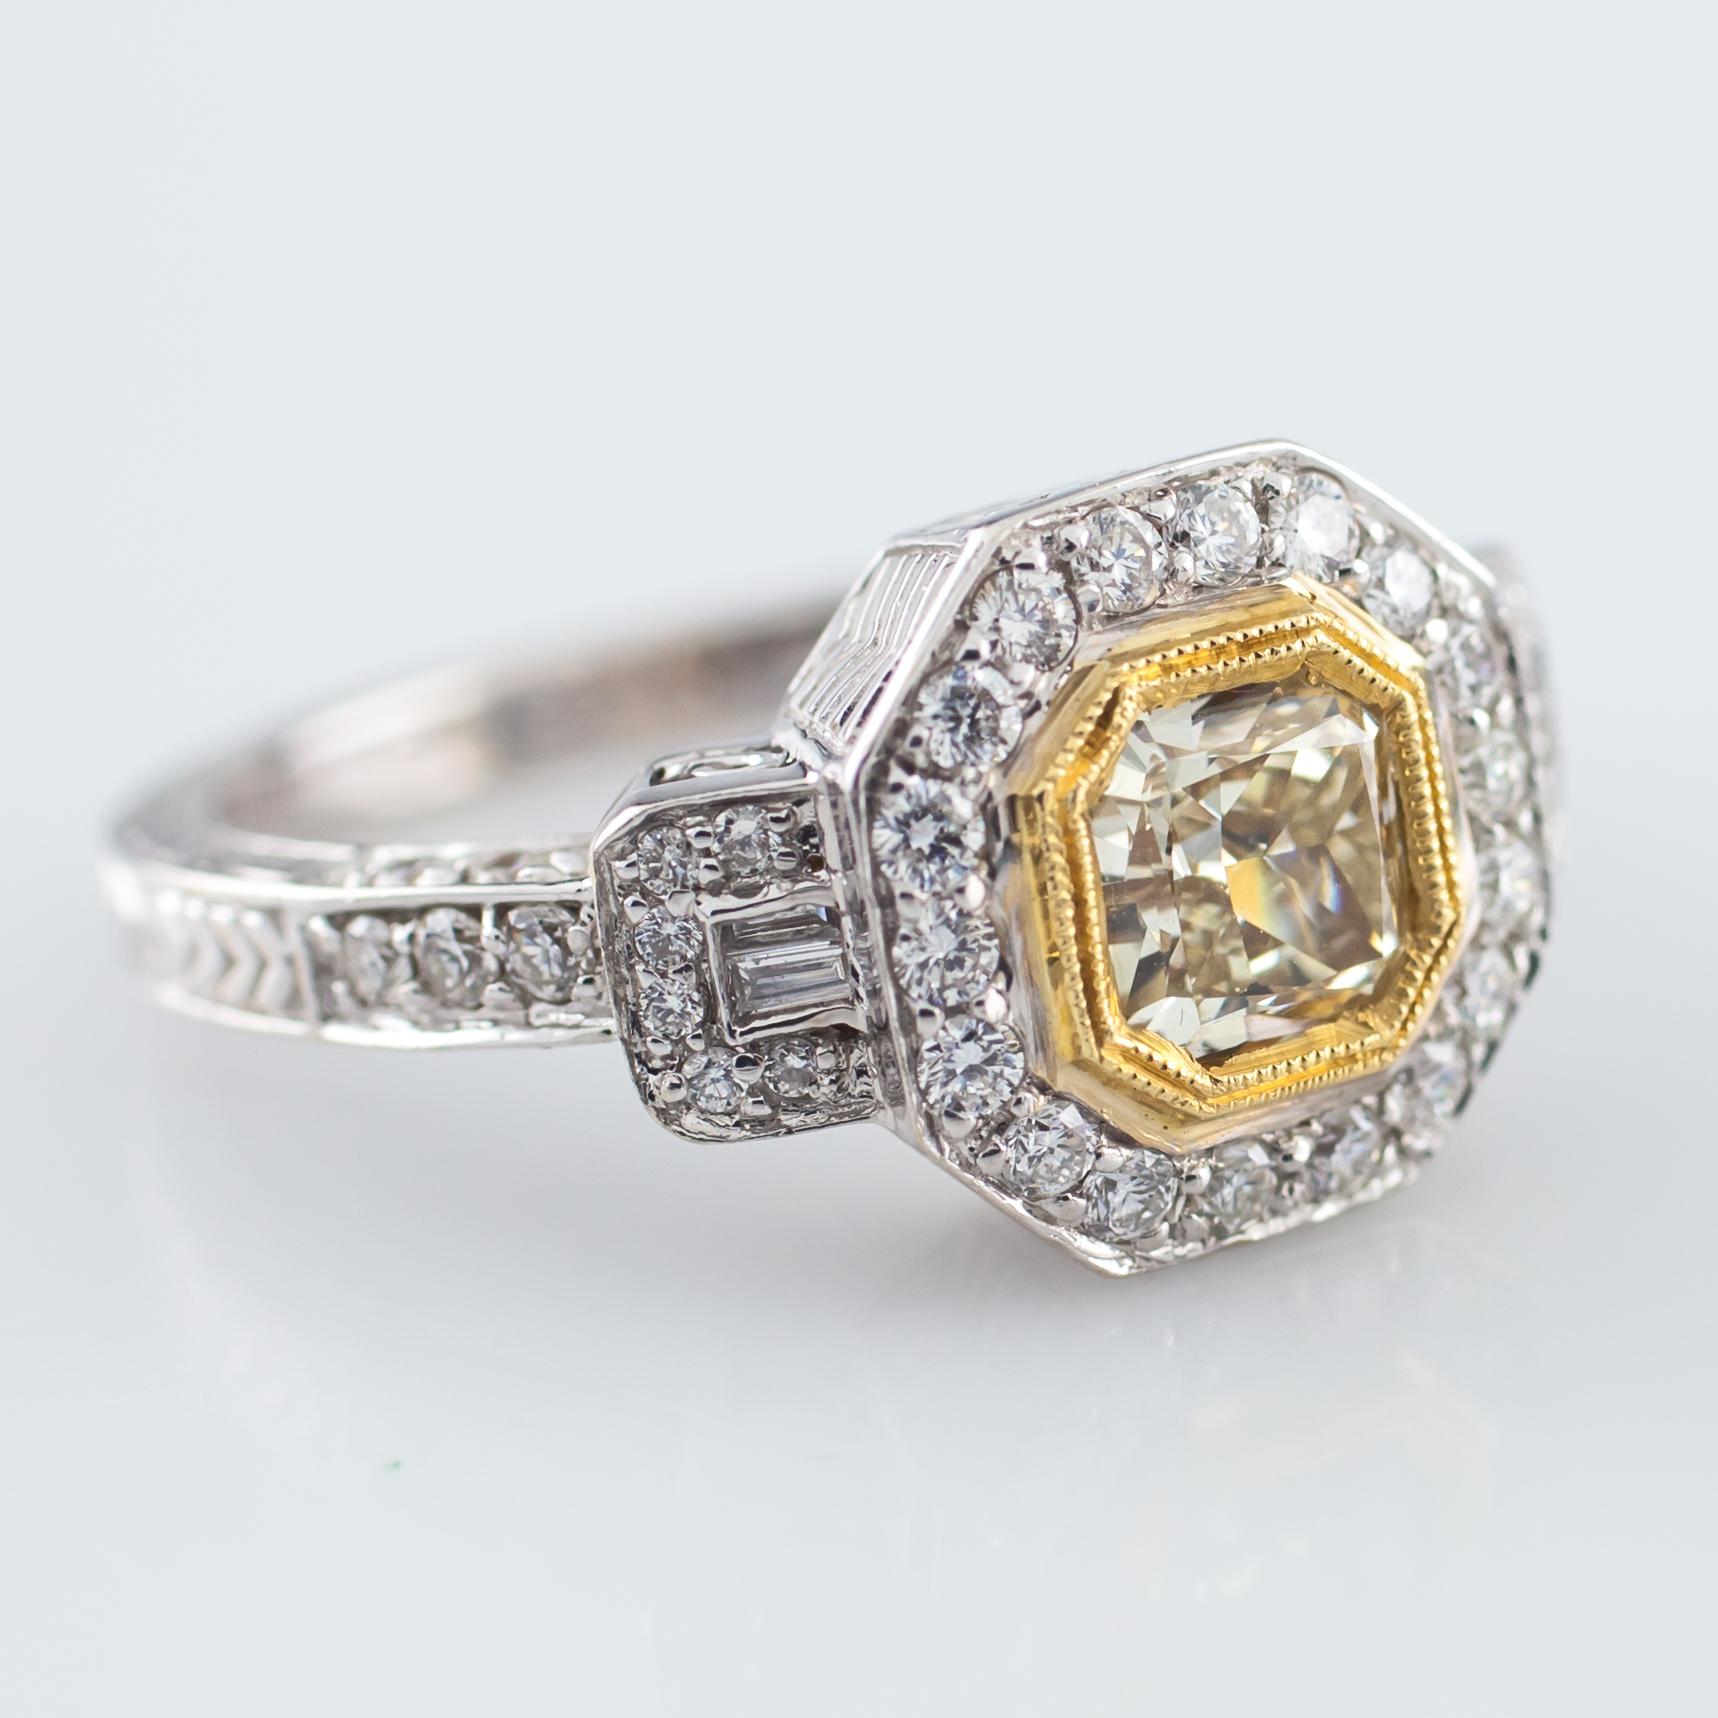 Gorgeous 18k gold ring featuring fancy yellow radiant solitaire (0.92 ct, VS2 clarity), and round and baguette accent diamonds (0.60 ct, G - H color, VS1 - VS2 clarity)
Ring Size: 6.5
Total Mass = 6.6 grams
Includes EGL Colored Diamond Analysis